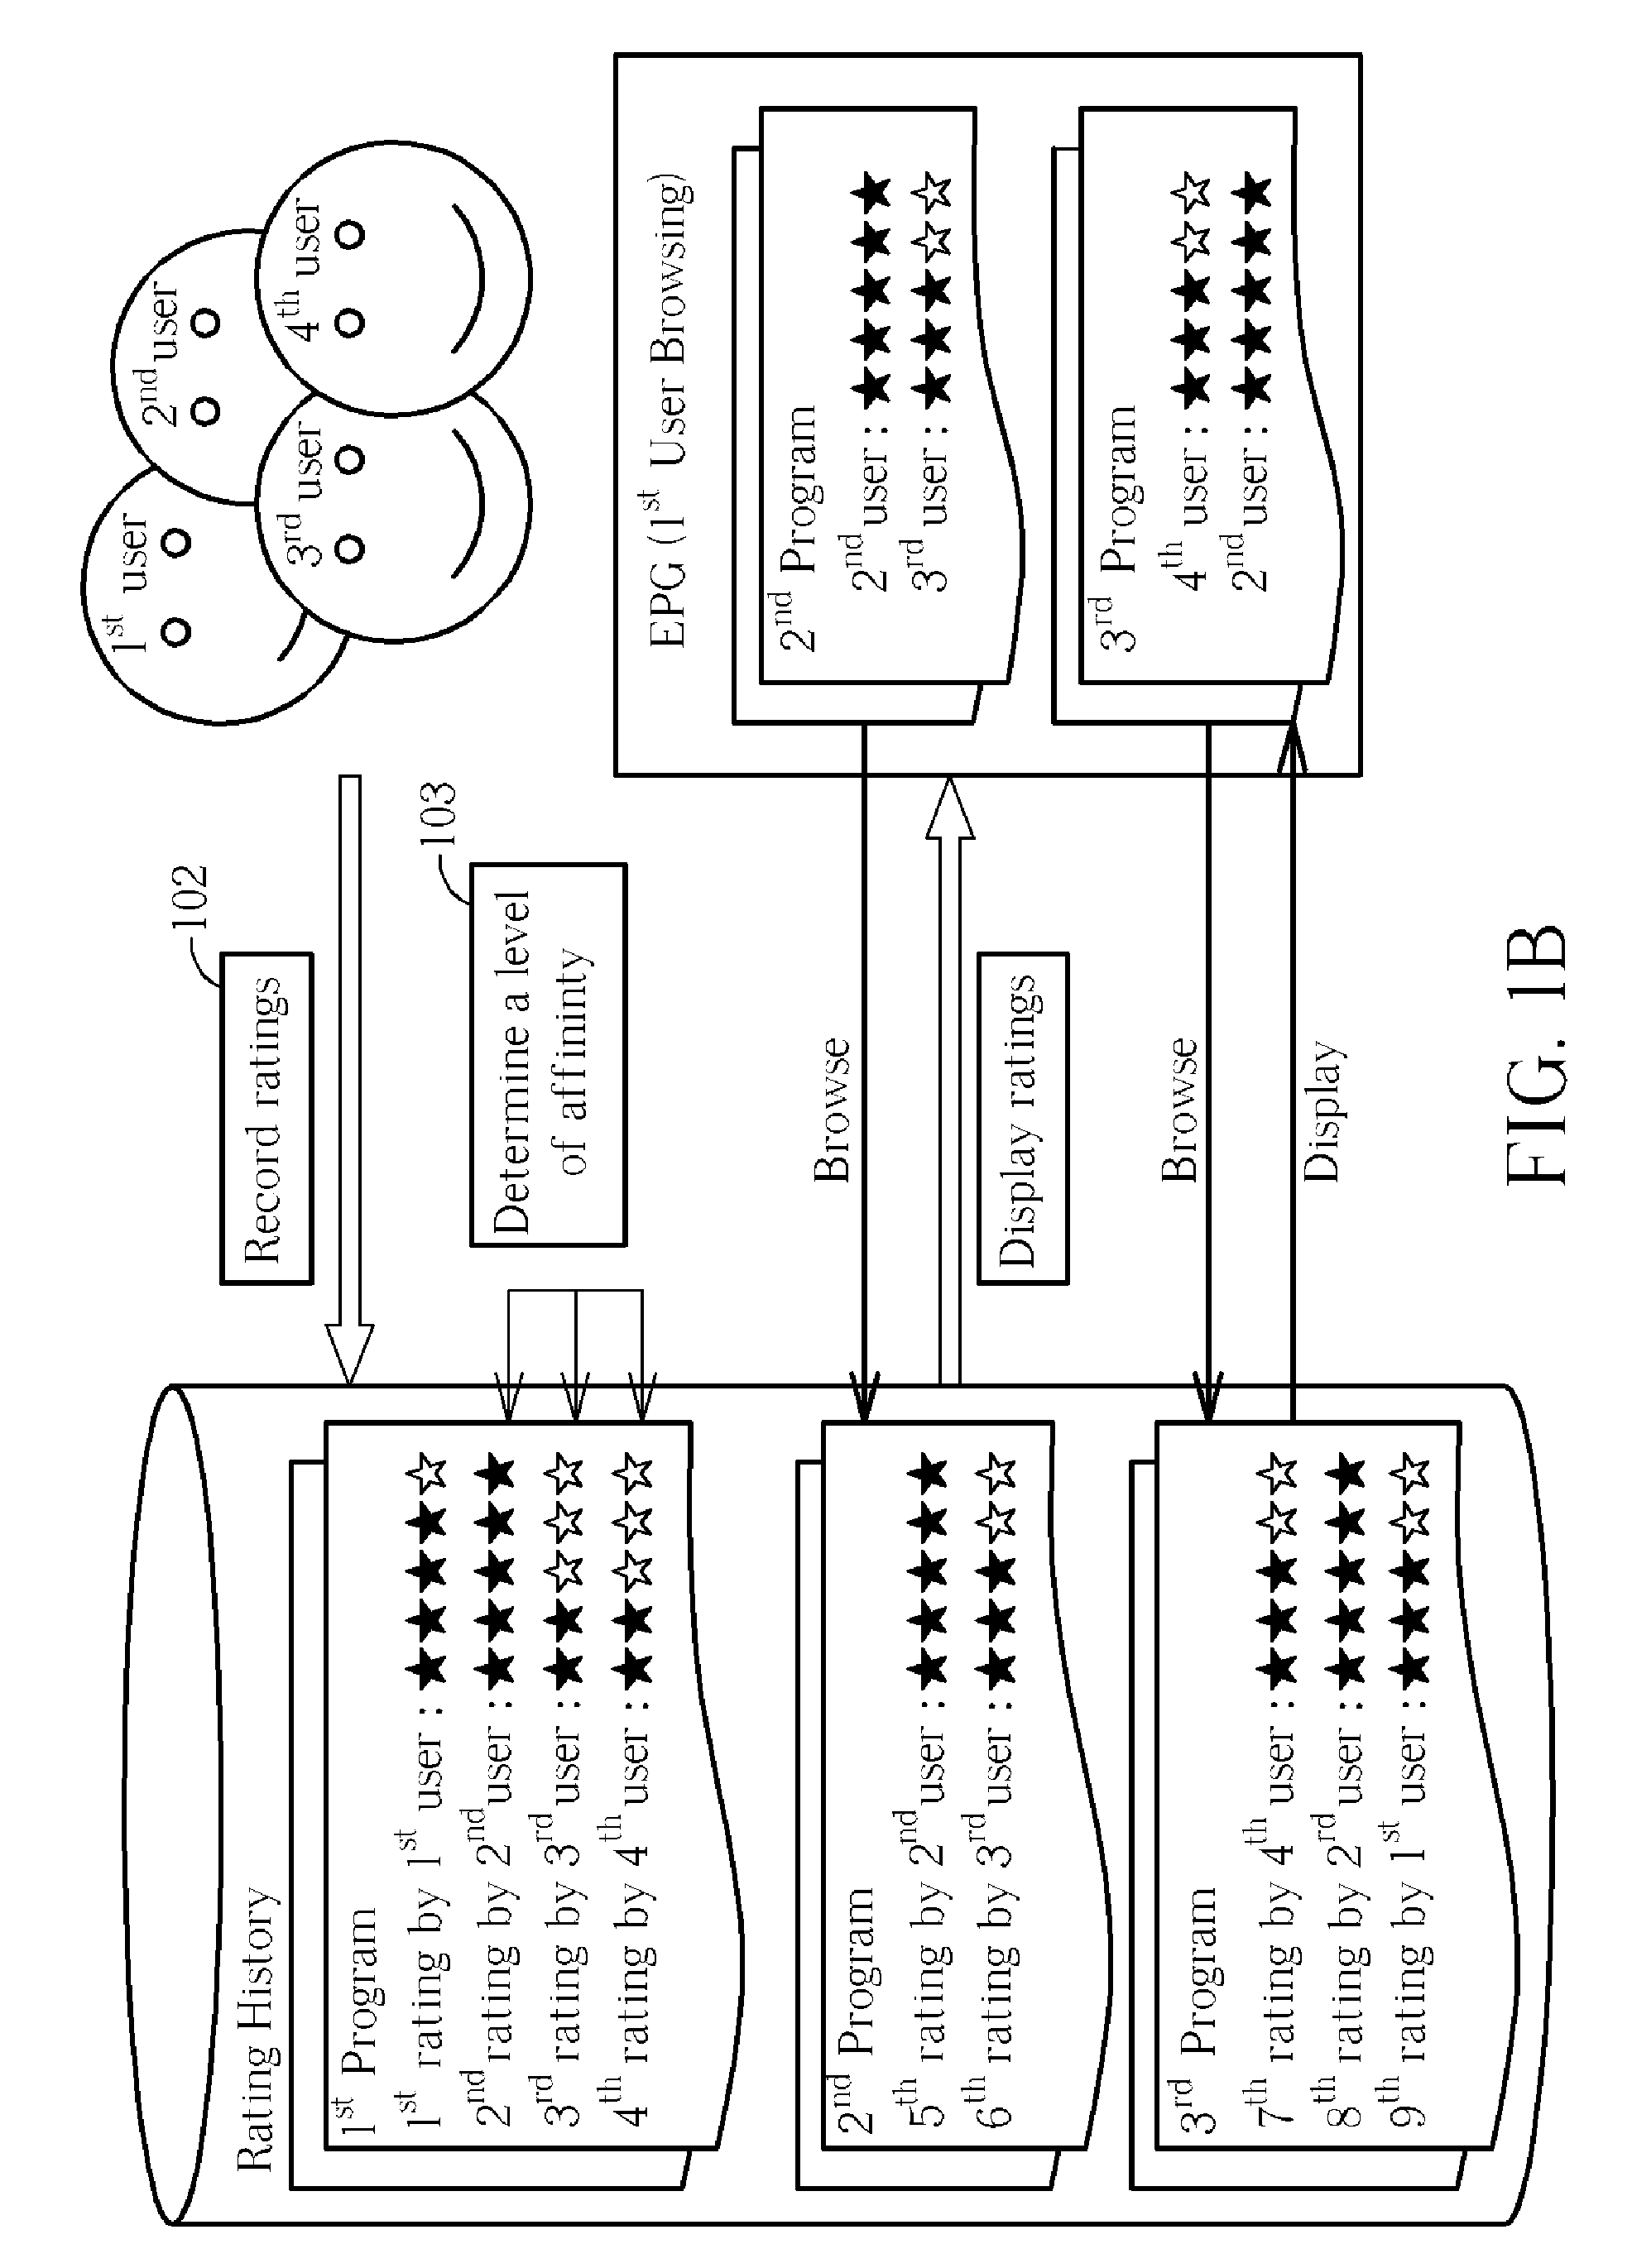 Method for displaying search results in a browser interface